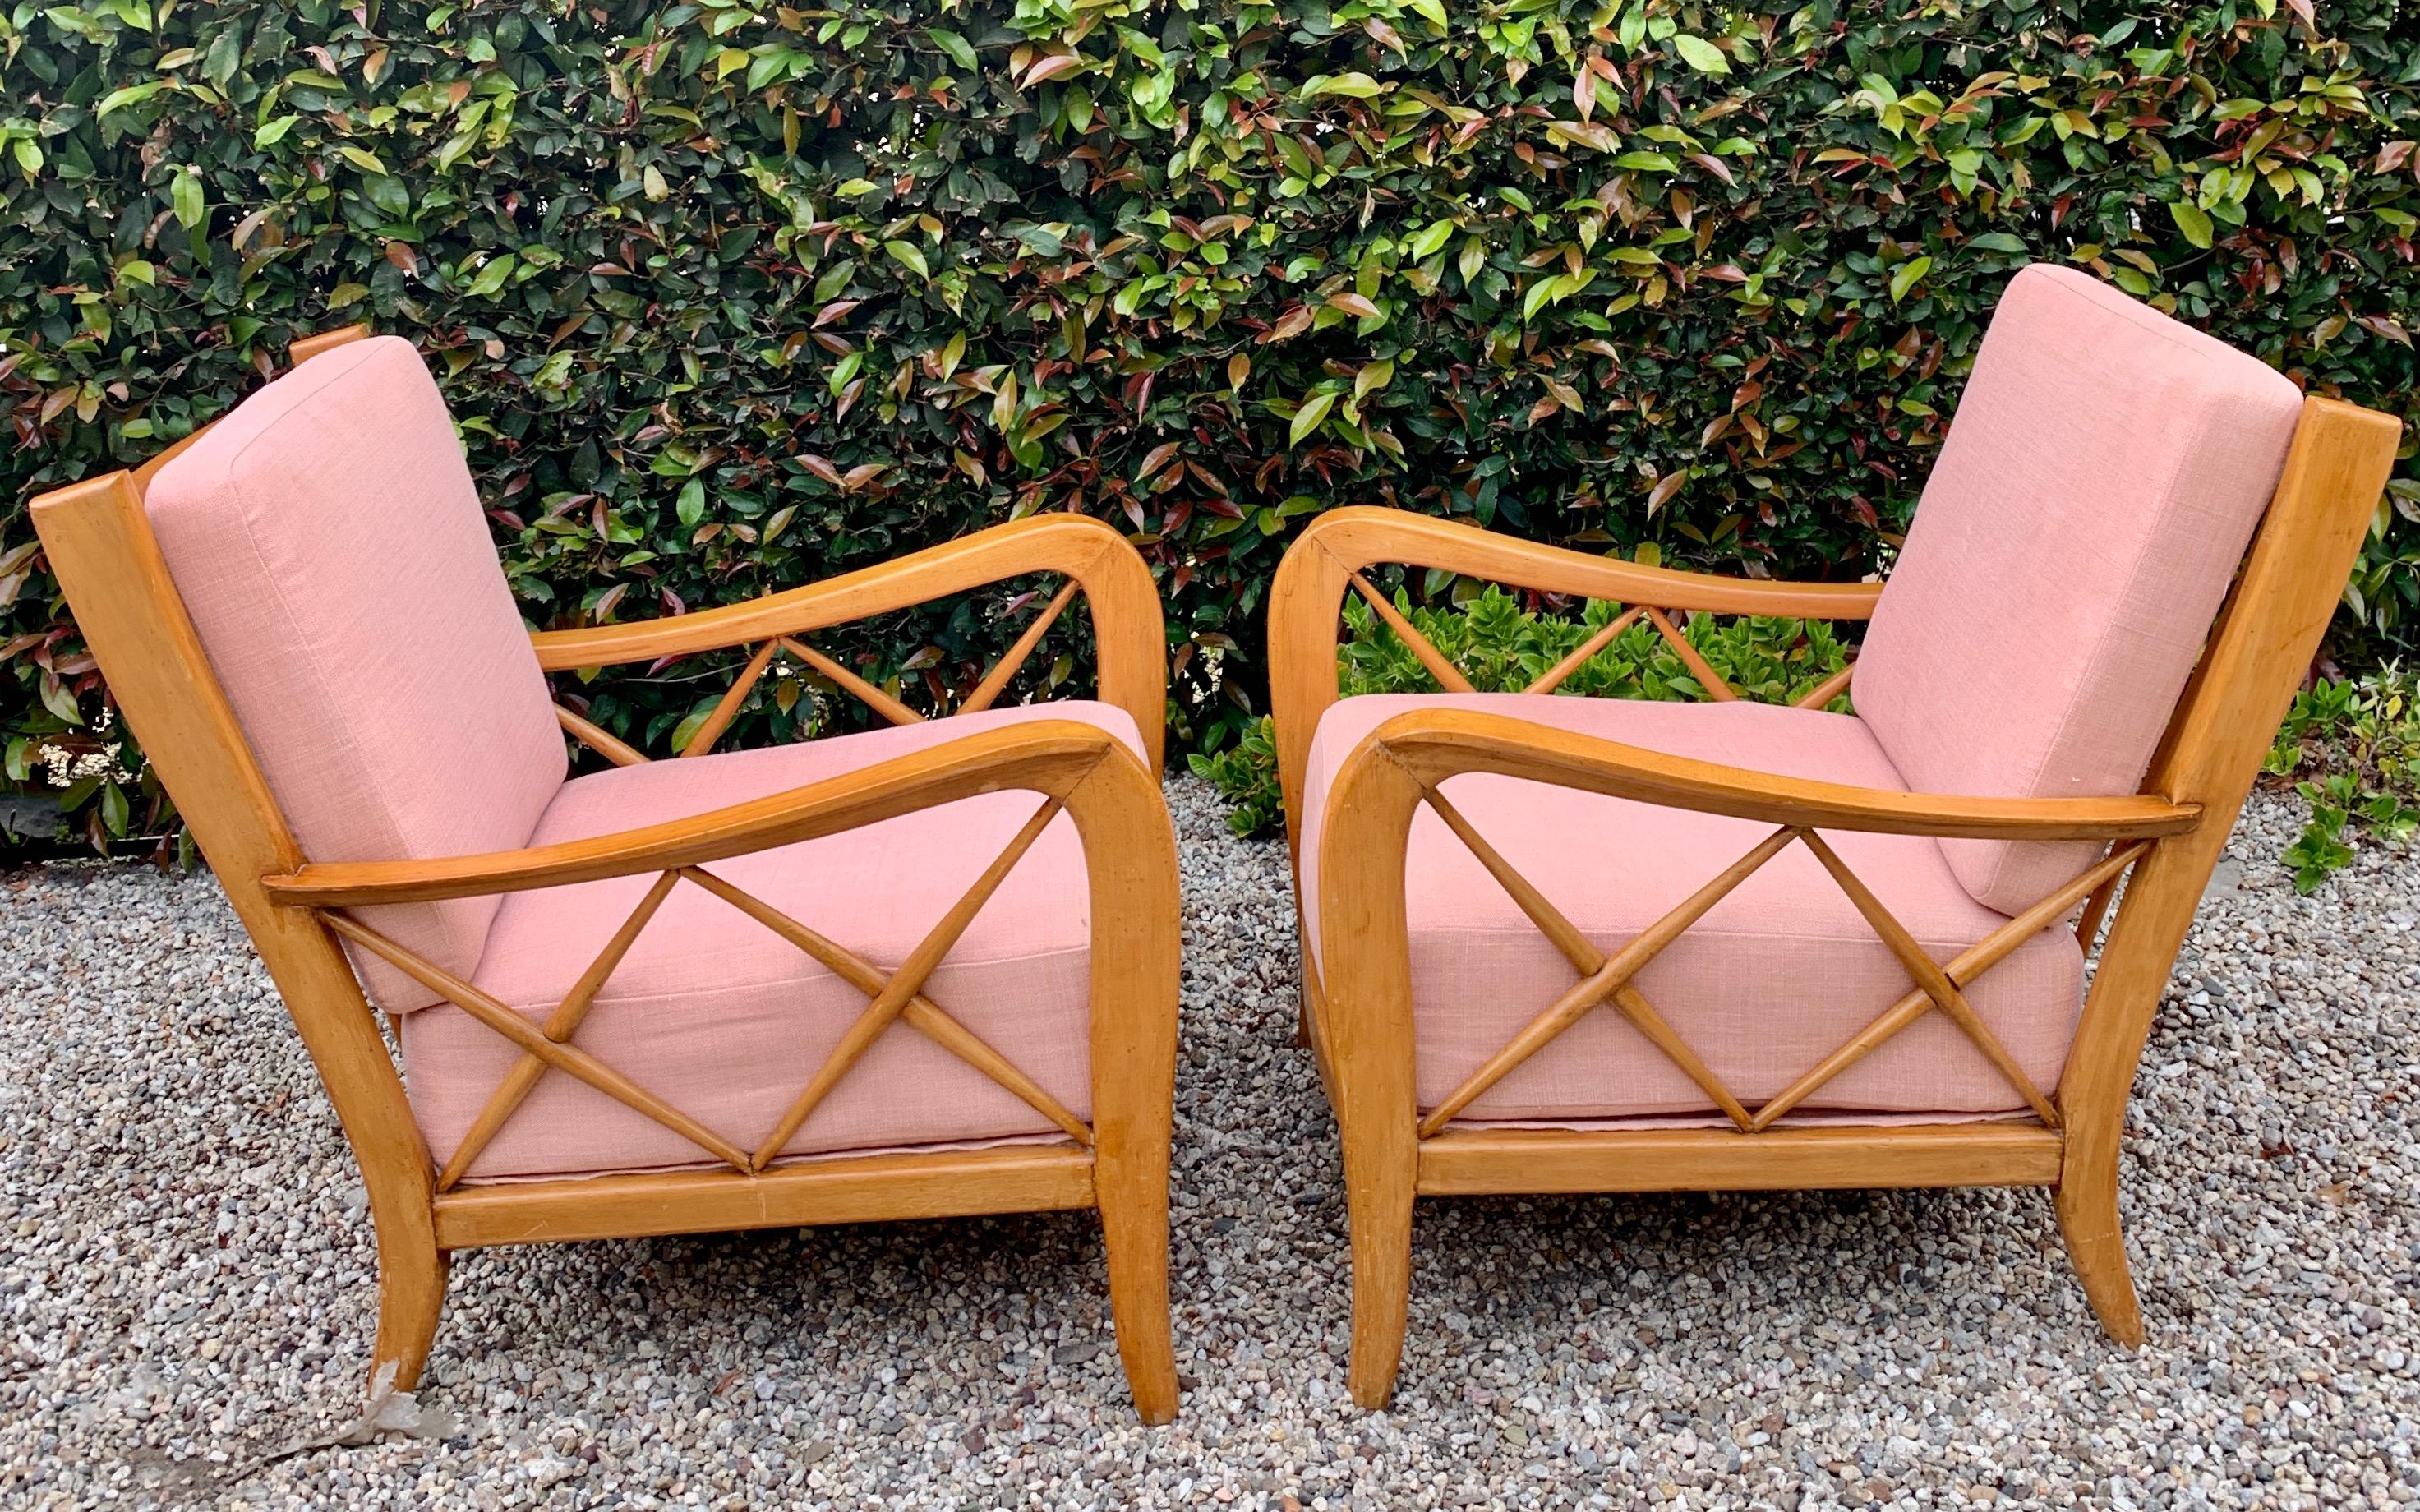 A pair of Italian lounge chairs, by Paolo Buffa and upholstered in hand sewn Rose hued Pierre Frey Linen. The pair are exquisitely designed with chic, yet bold detailing - from the subtle carved wood, to the crossed arm details. The European pair